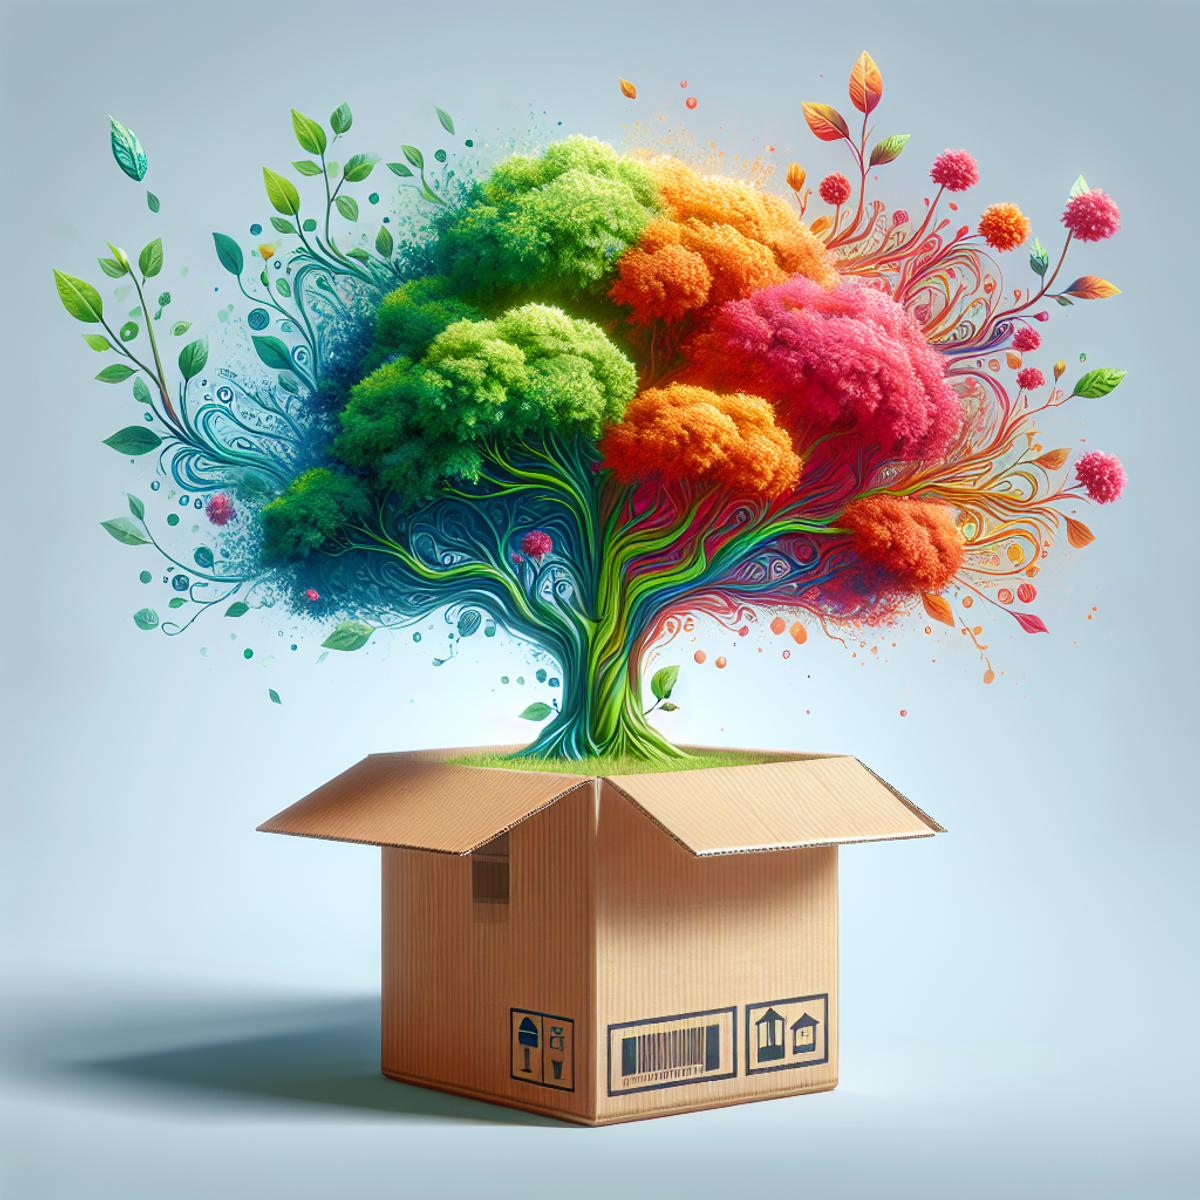 A blossoming tree emerging from a shipping box, representing eco-friendly practices in online selling.